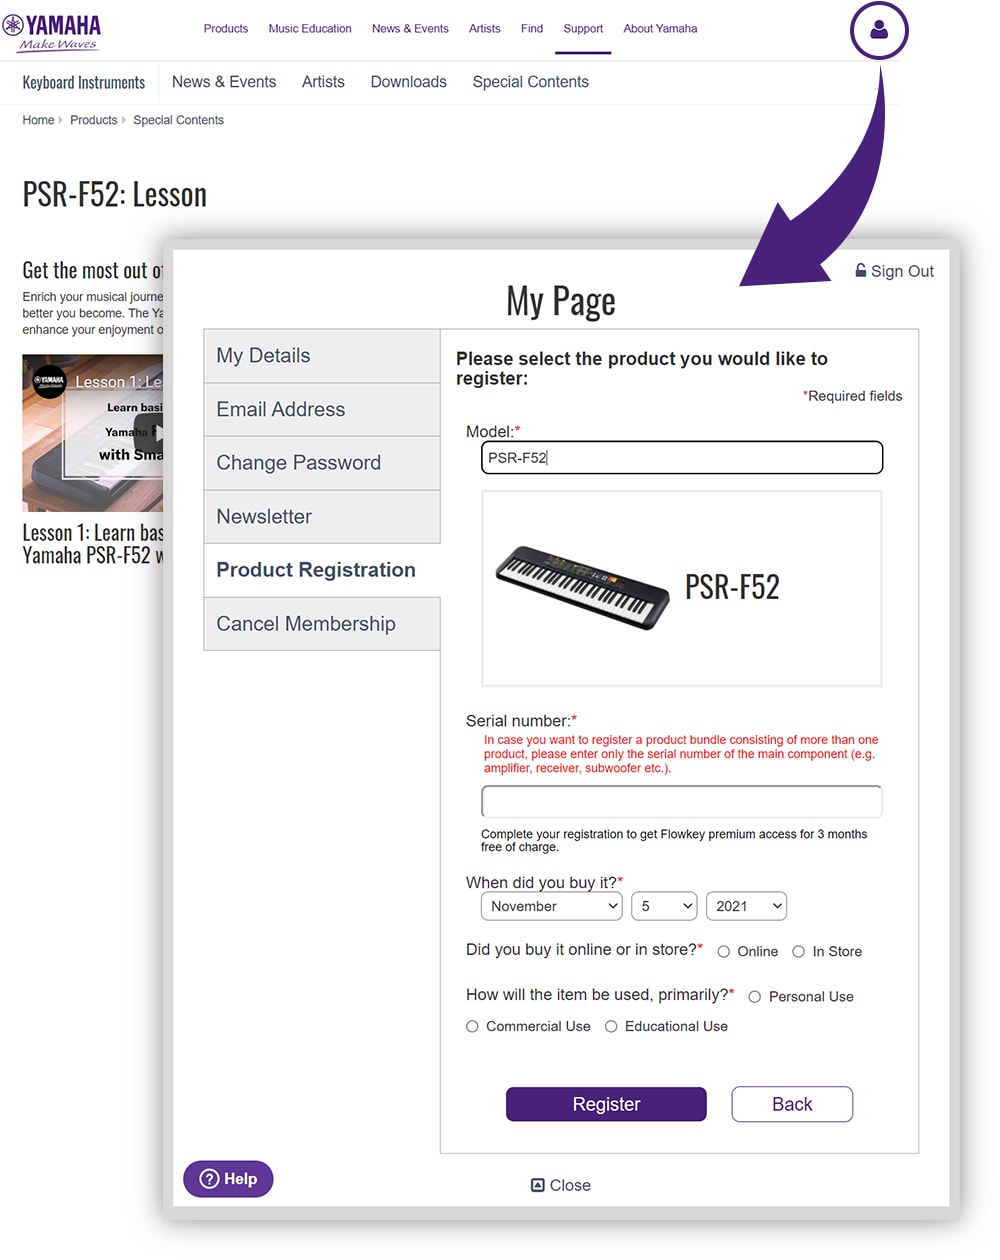 How to register PSR-F52 correctly